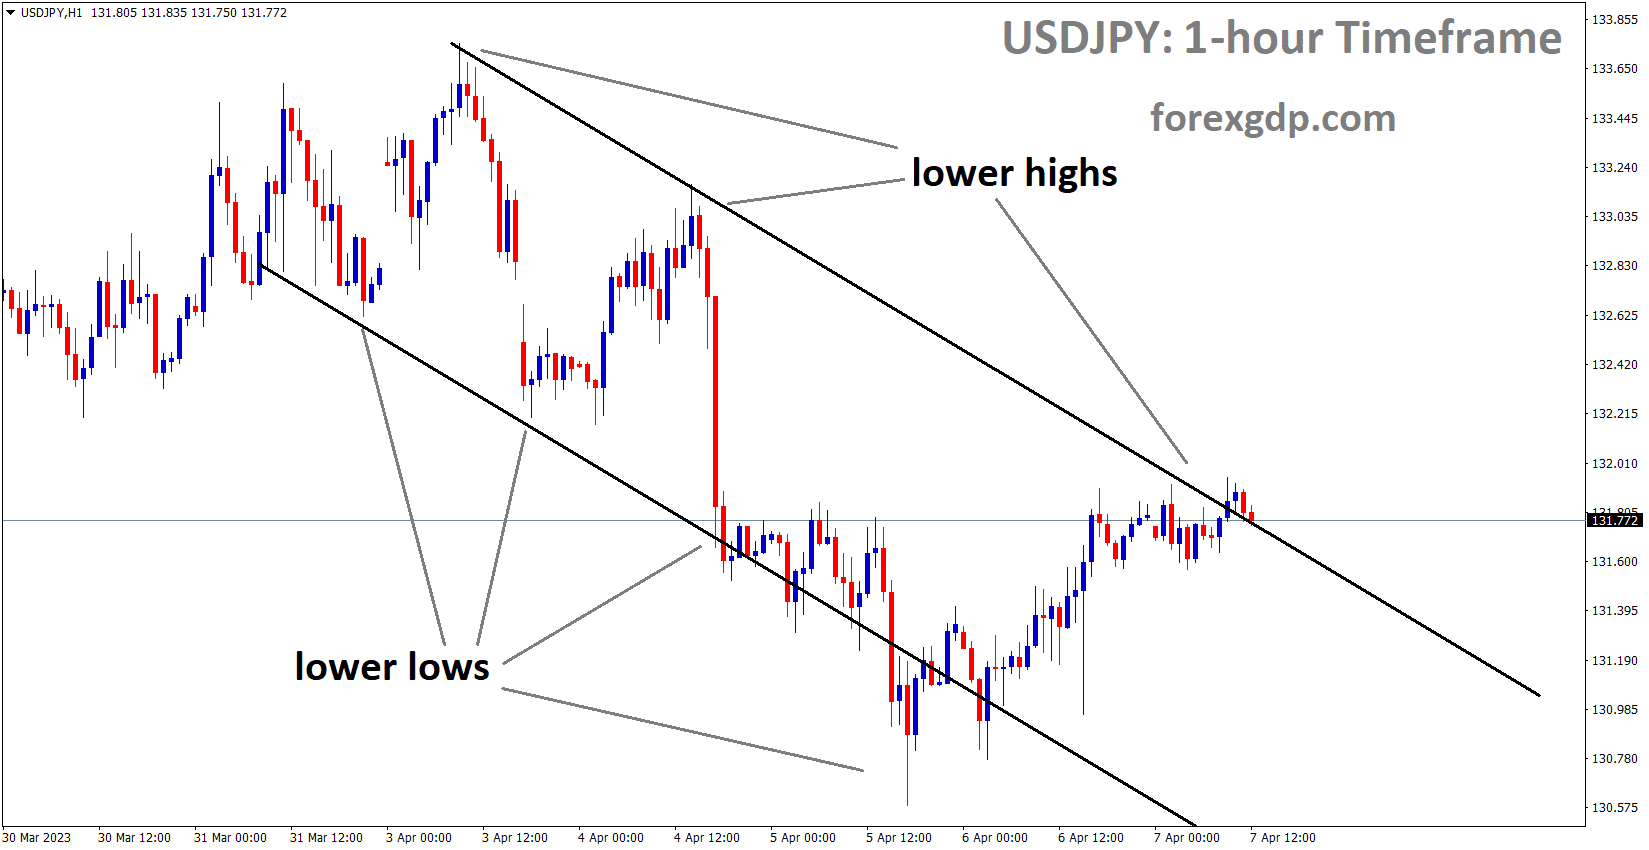 USDJPY is moving in the Descending channel and the market has reached the lower high area of the channel